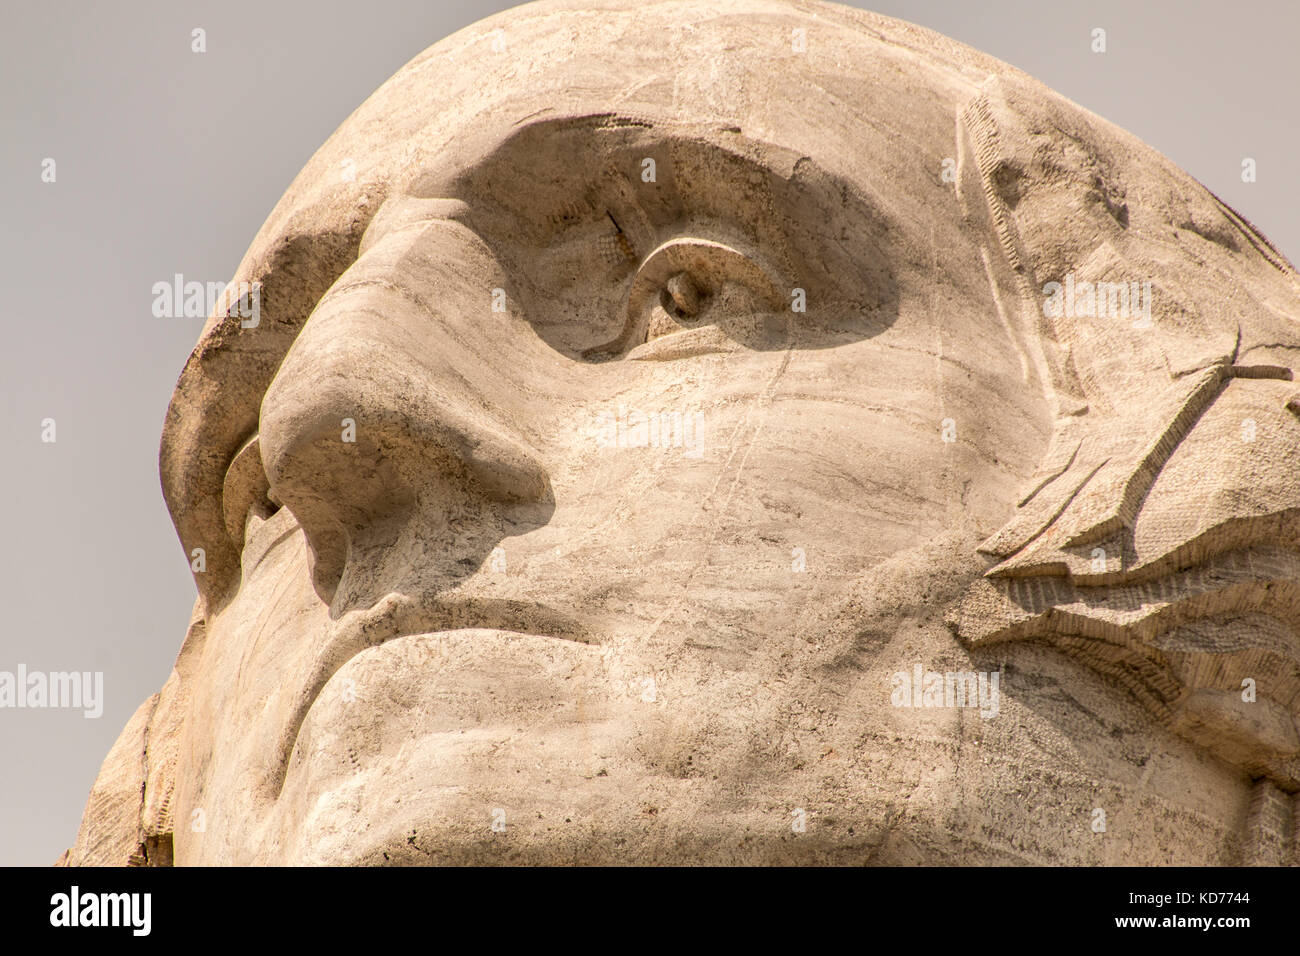 BLACK HILLS, SOUTH DAKOTA/USA - August 25, 2014: A close-up of George Washington on the Mount Rushmore National Monument. Stock Photo